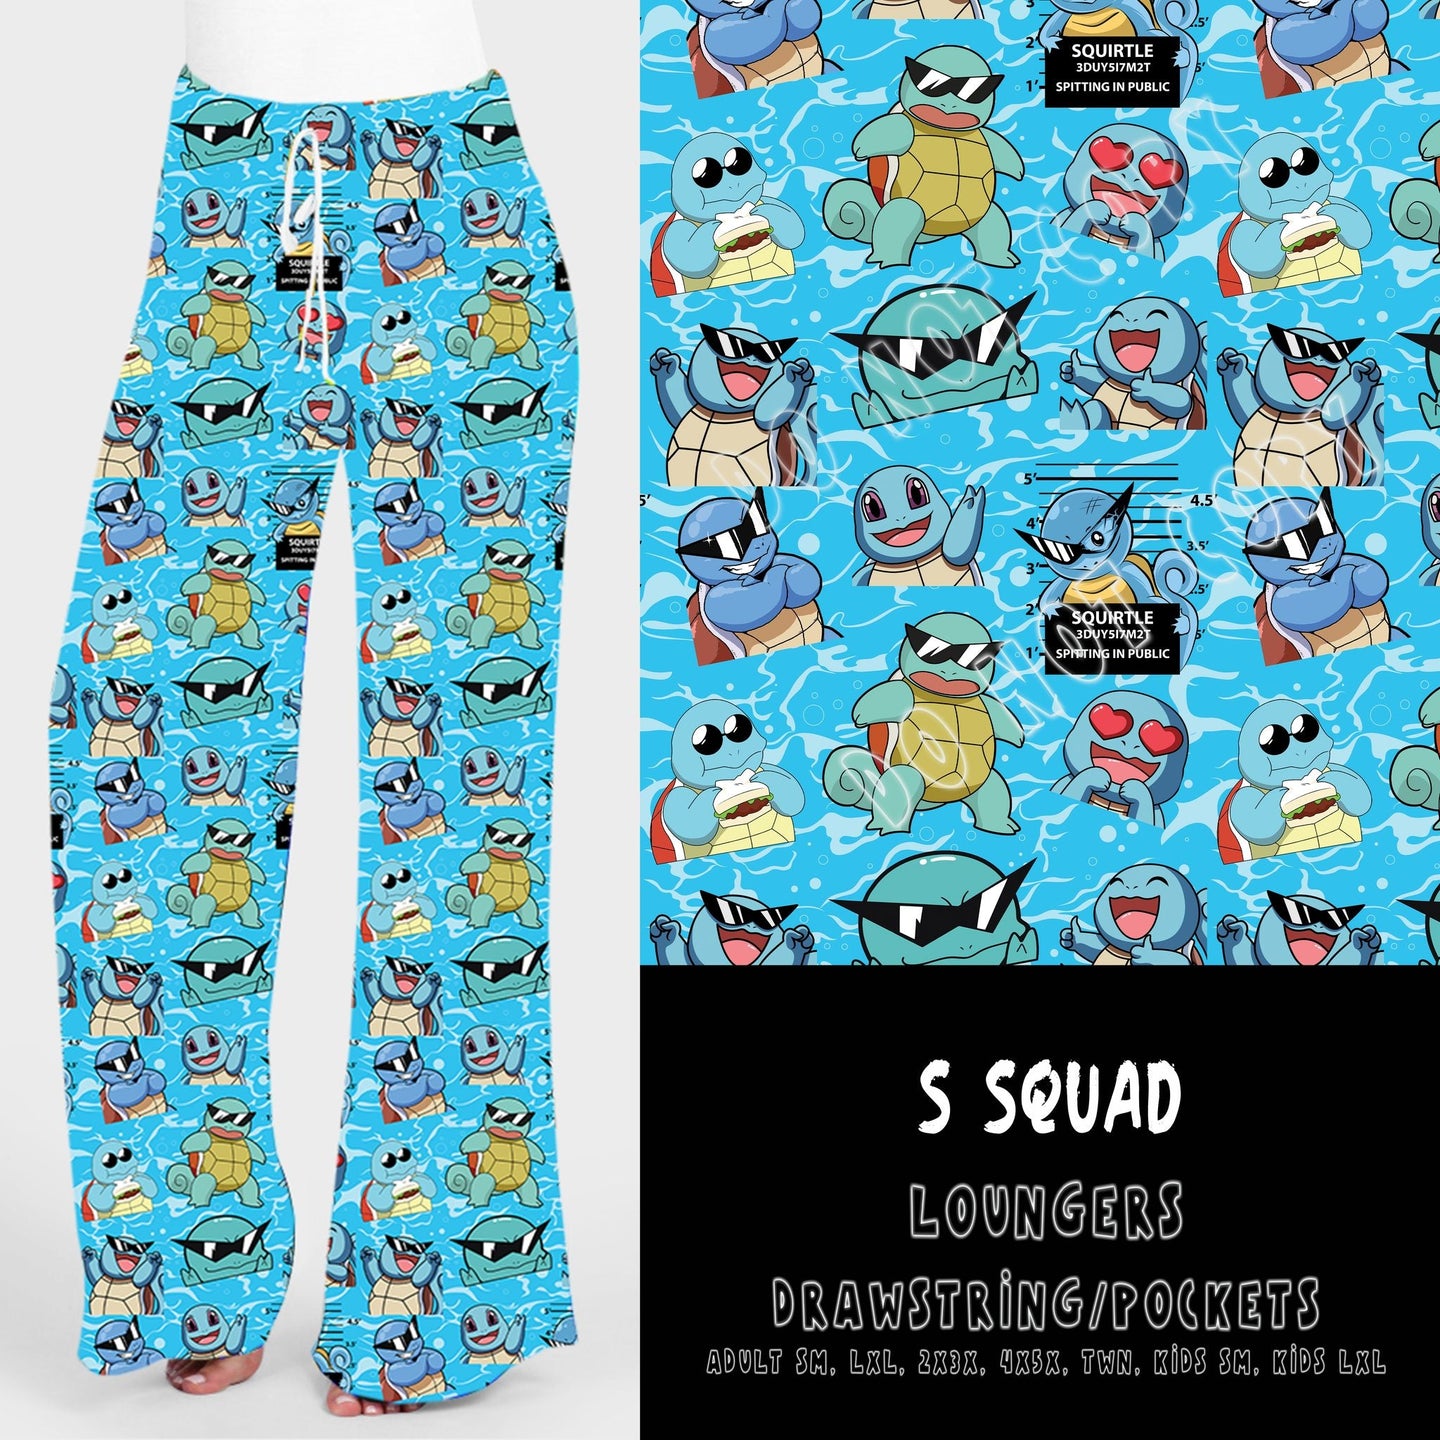 CATCH EM RUN-S SQUAD- LOUNGERS ADULTS/KIDS PREORDER CLOSING 1/13